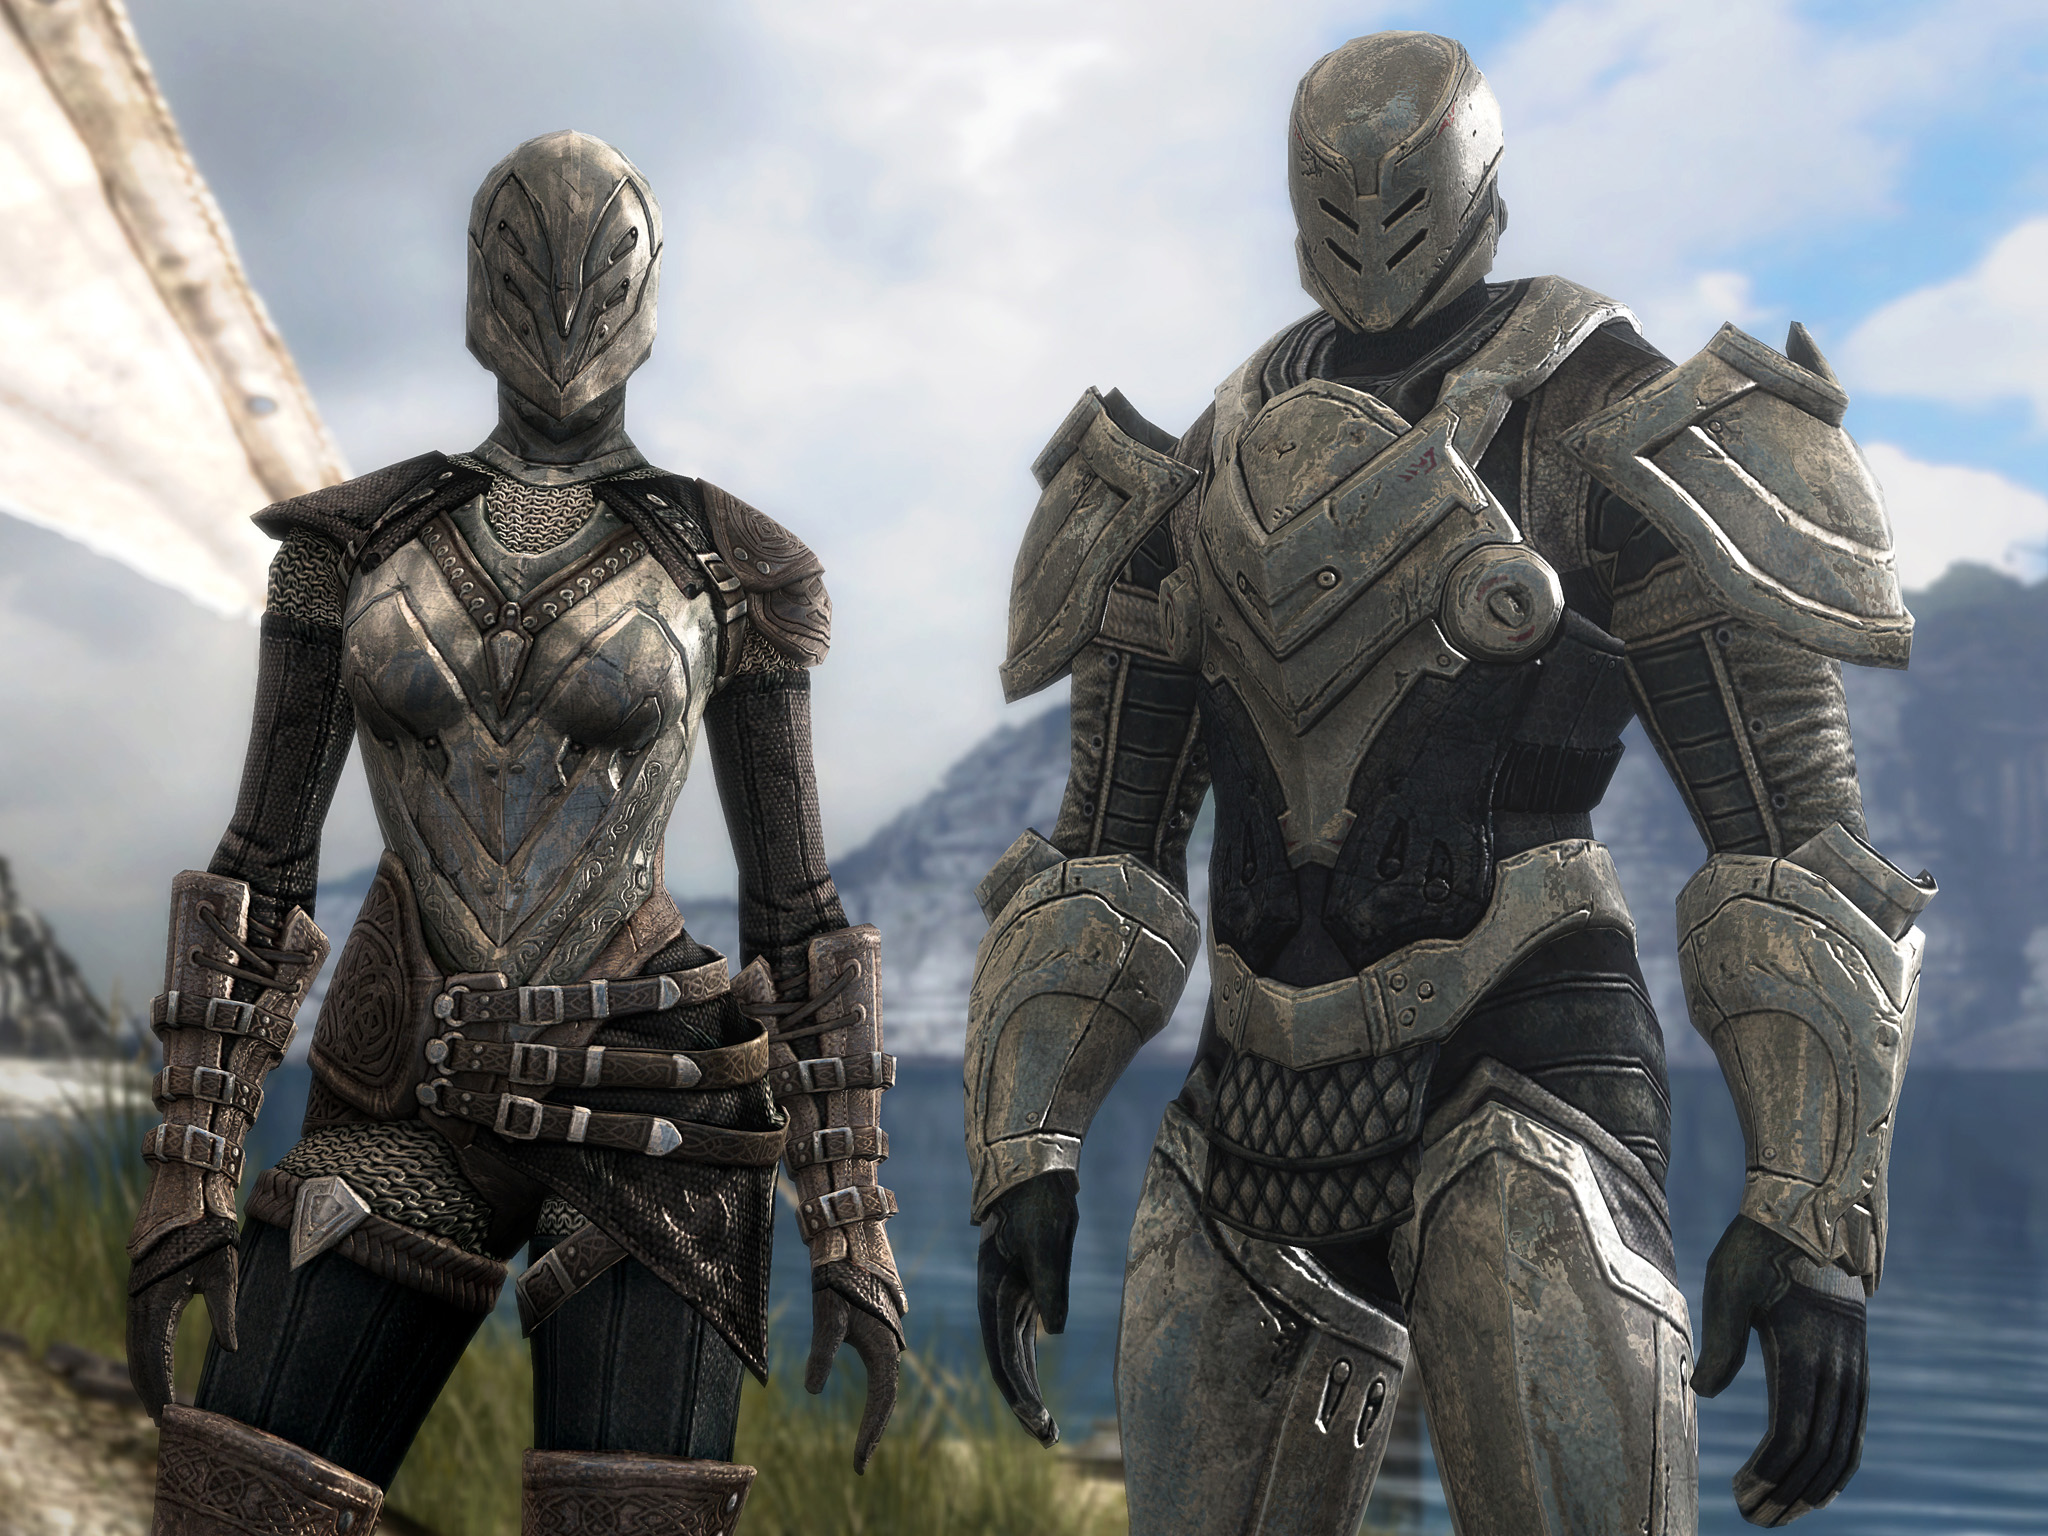 Infinity Blade III Launching With The New iPhone 5S